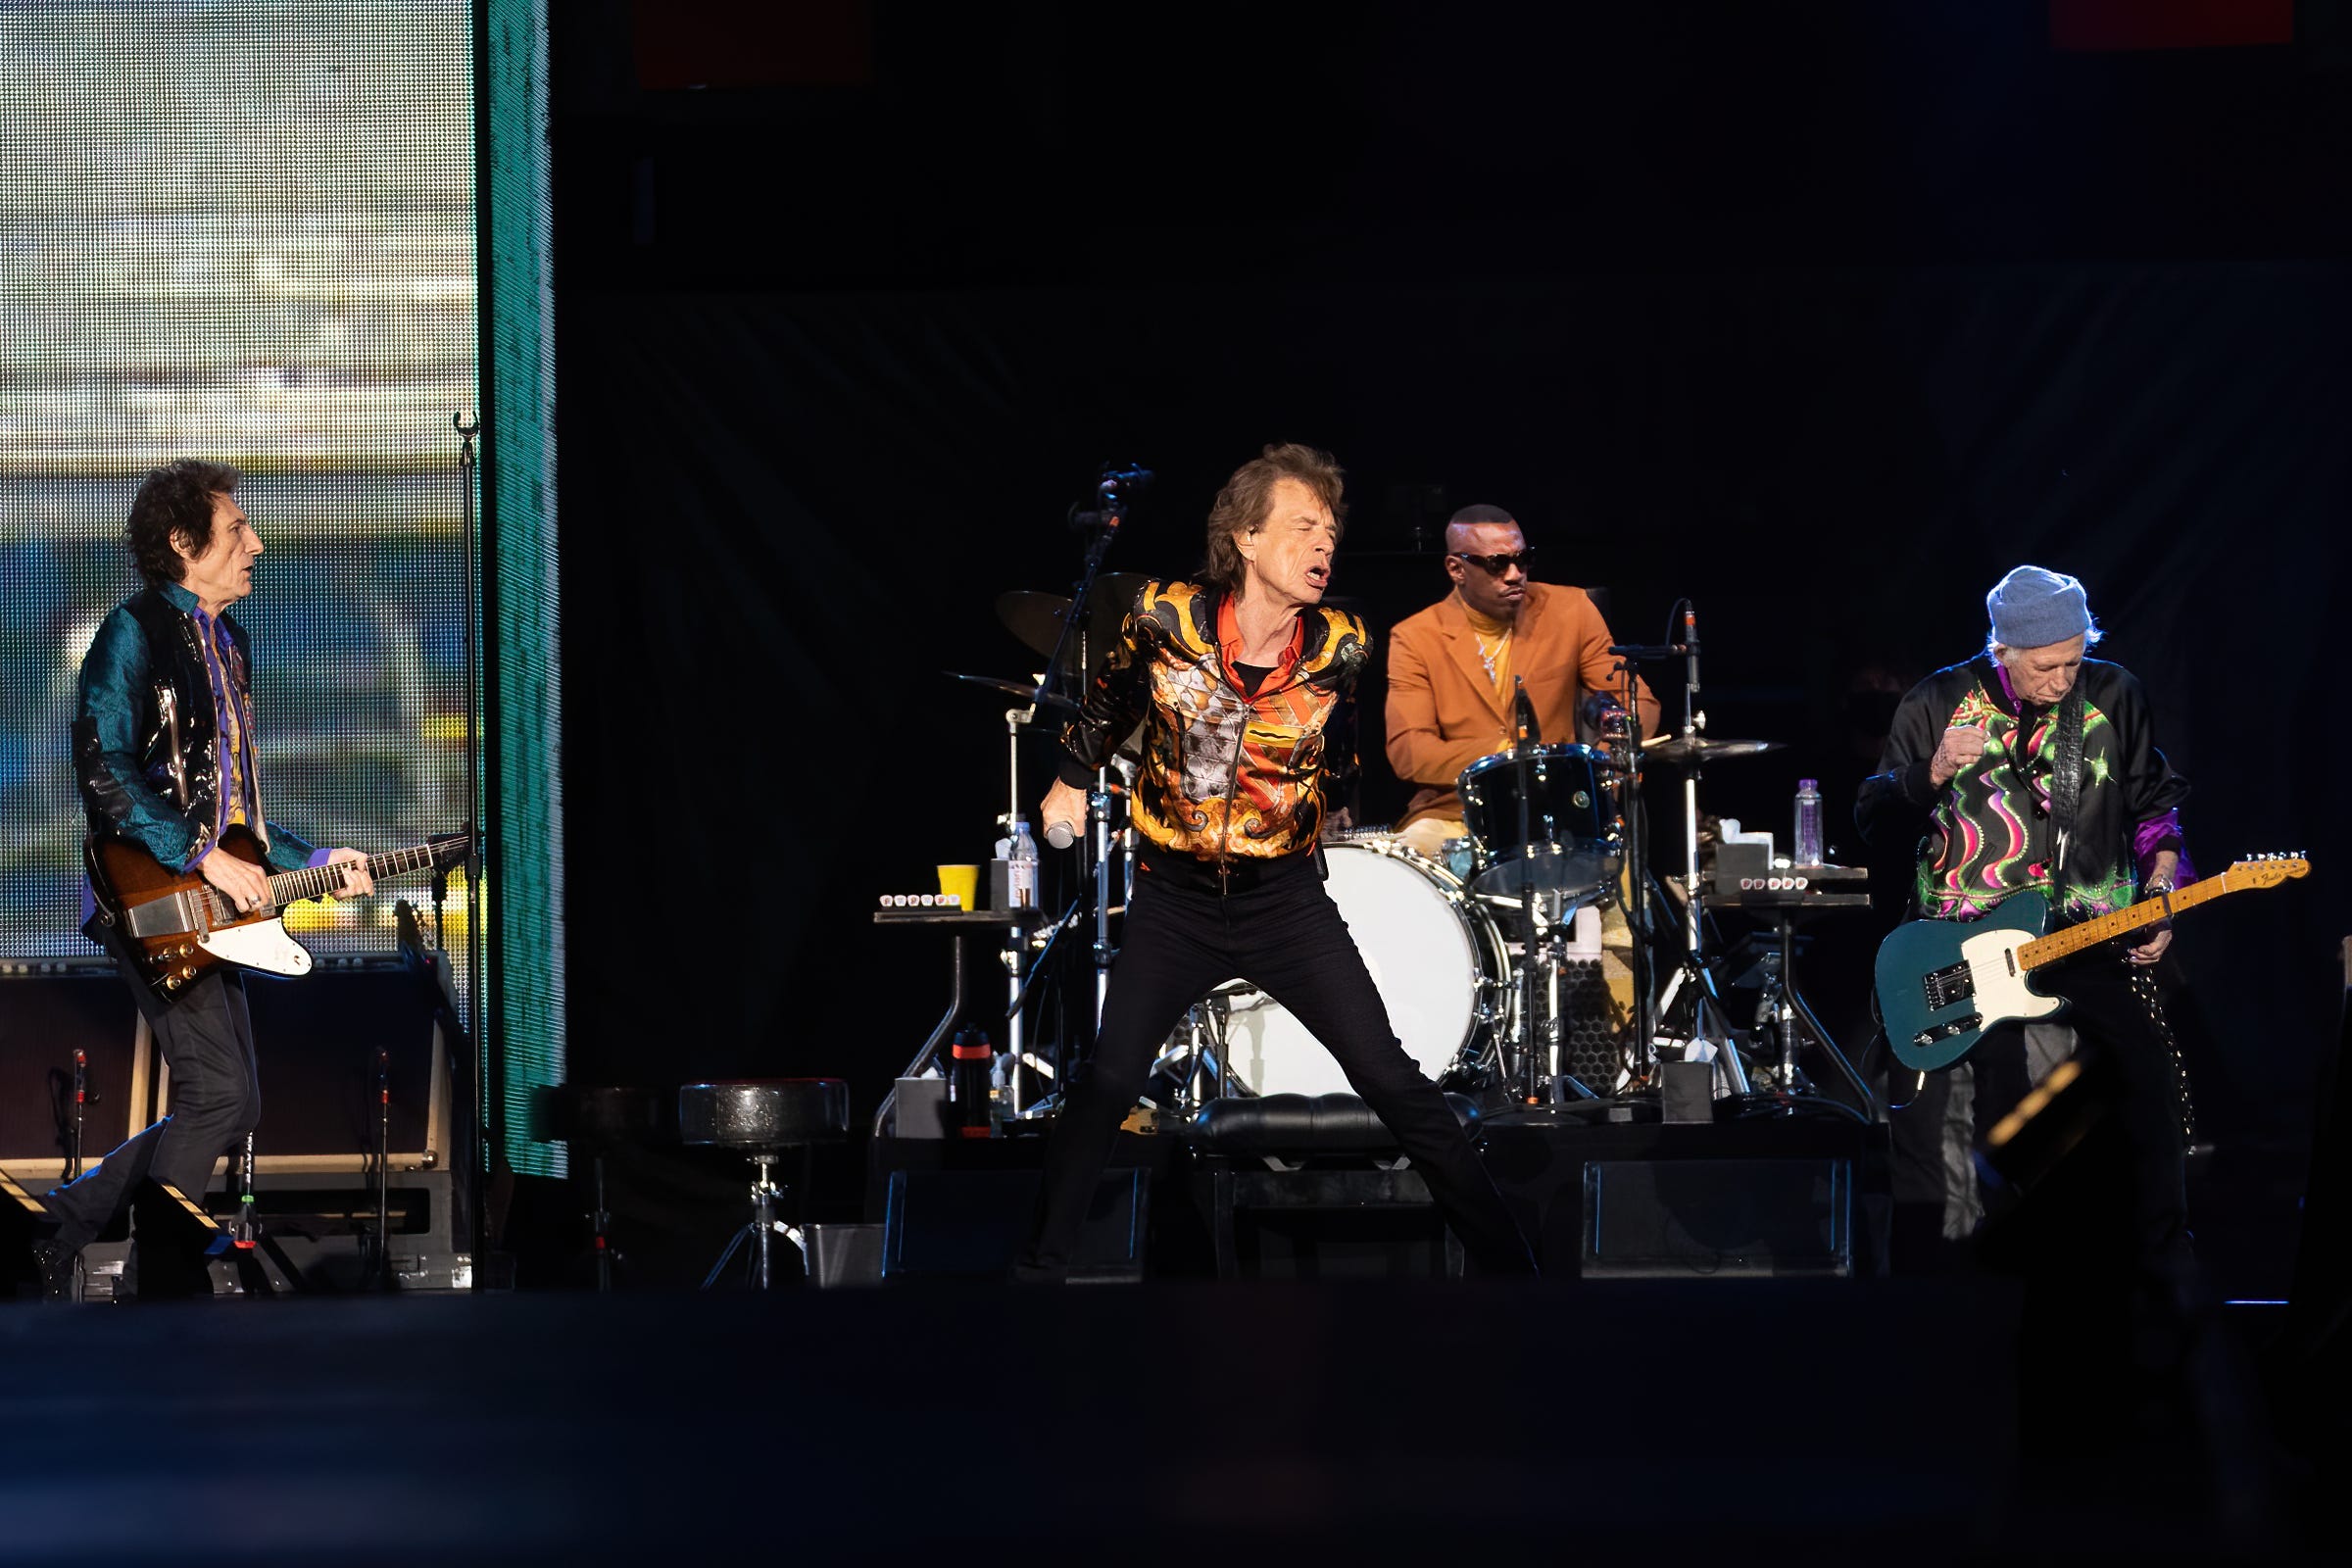 Ron Wood, from left, Mick Jagger, Steve Jordan and Keith Richards of the Rolling Stones perform at Circuit of the Americas on Saturday, Nov. 20, 2021, in Austin, Texas.